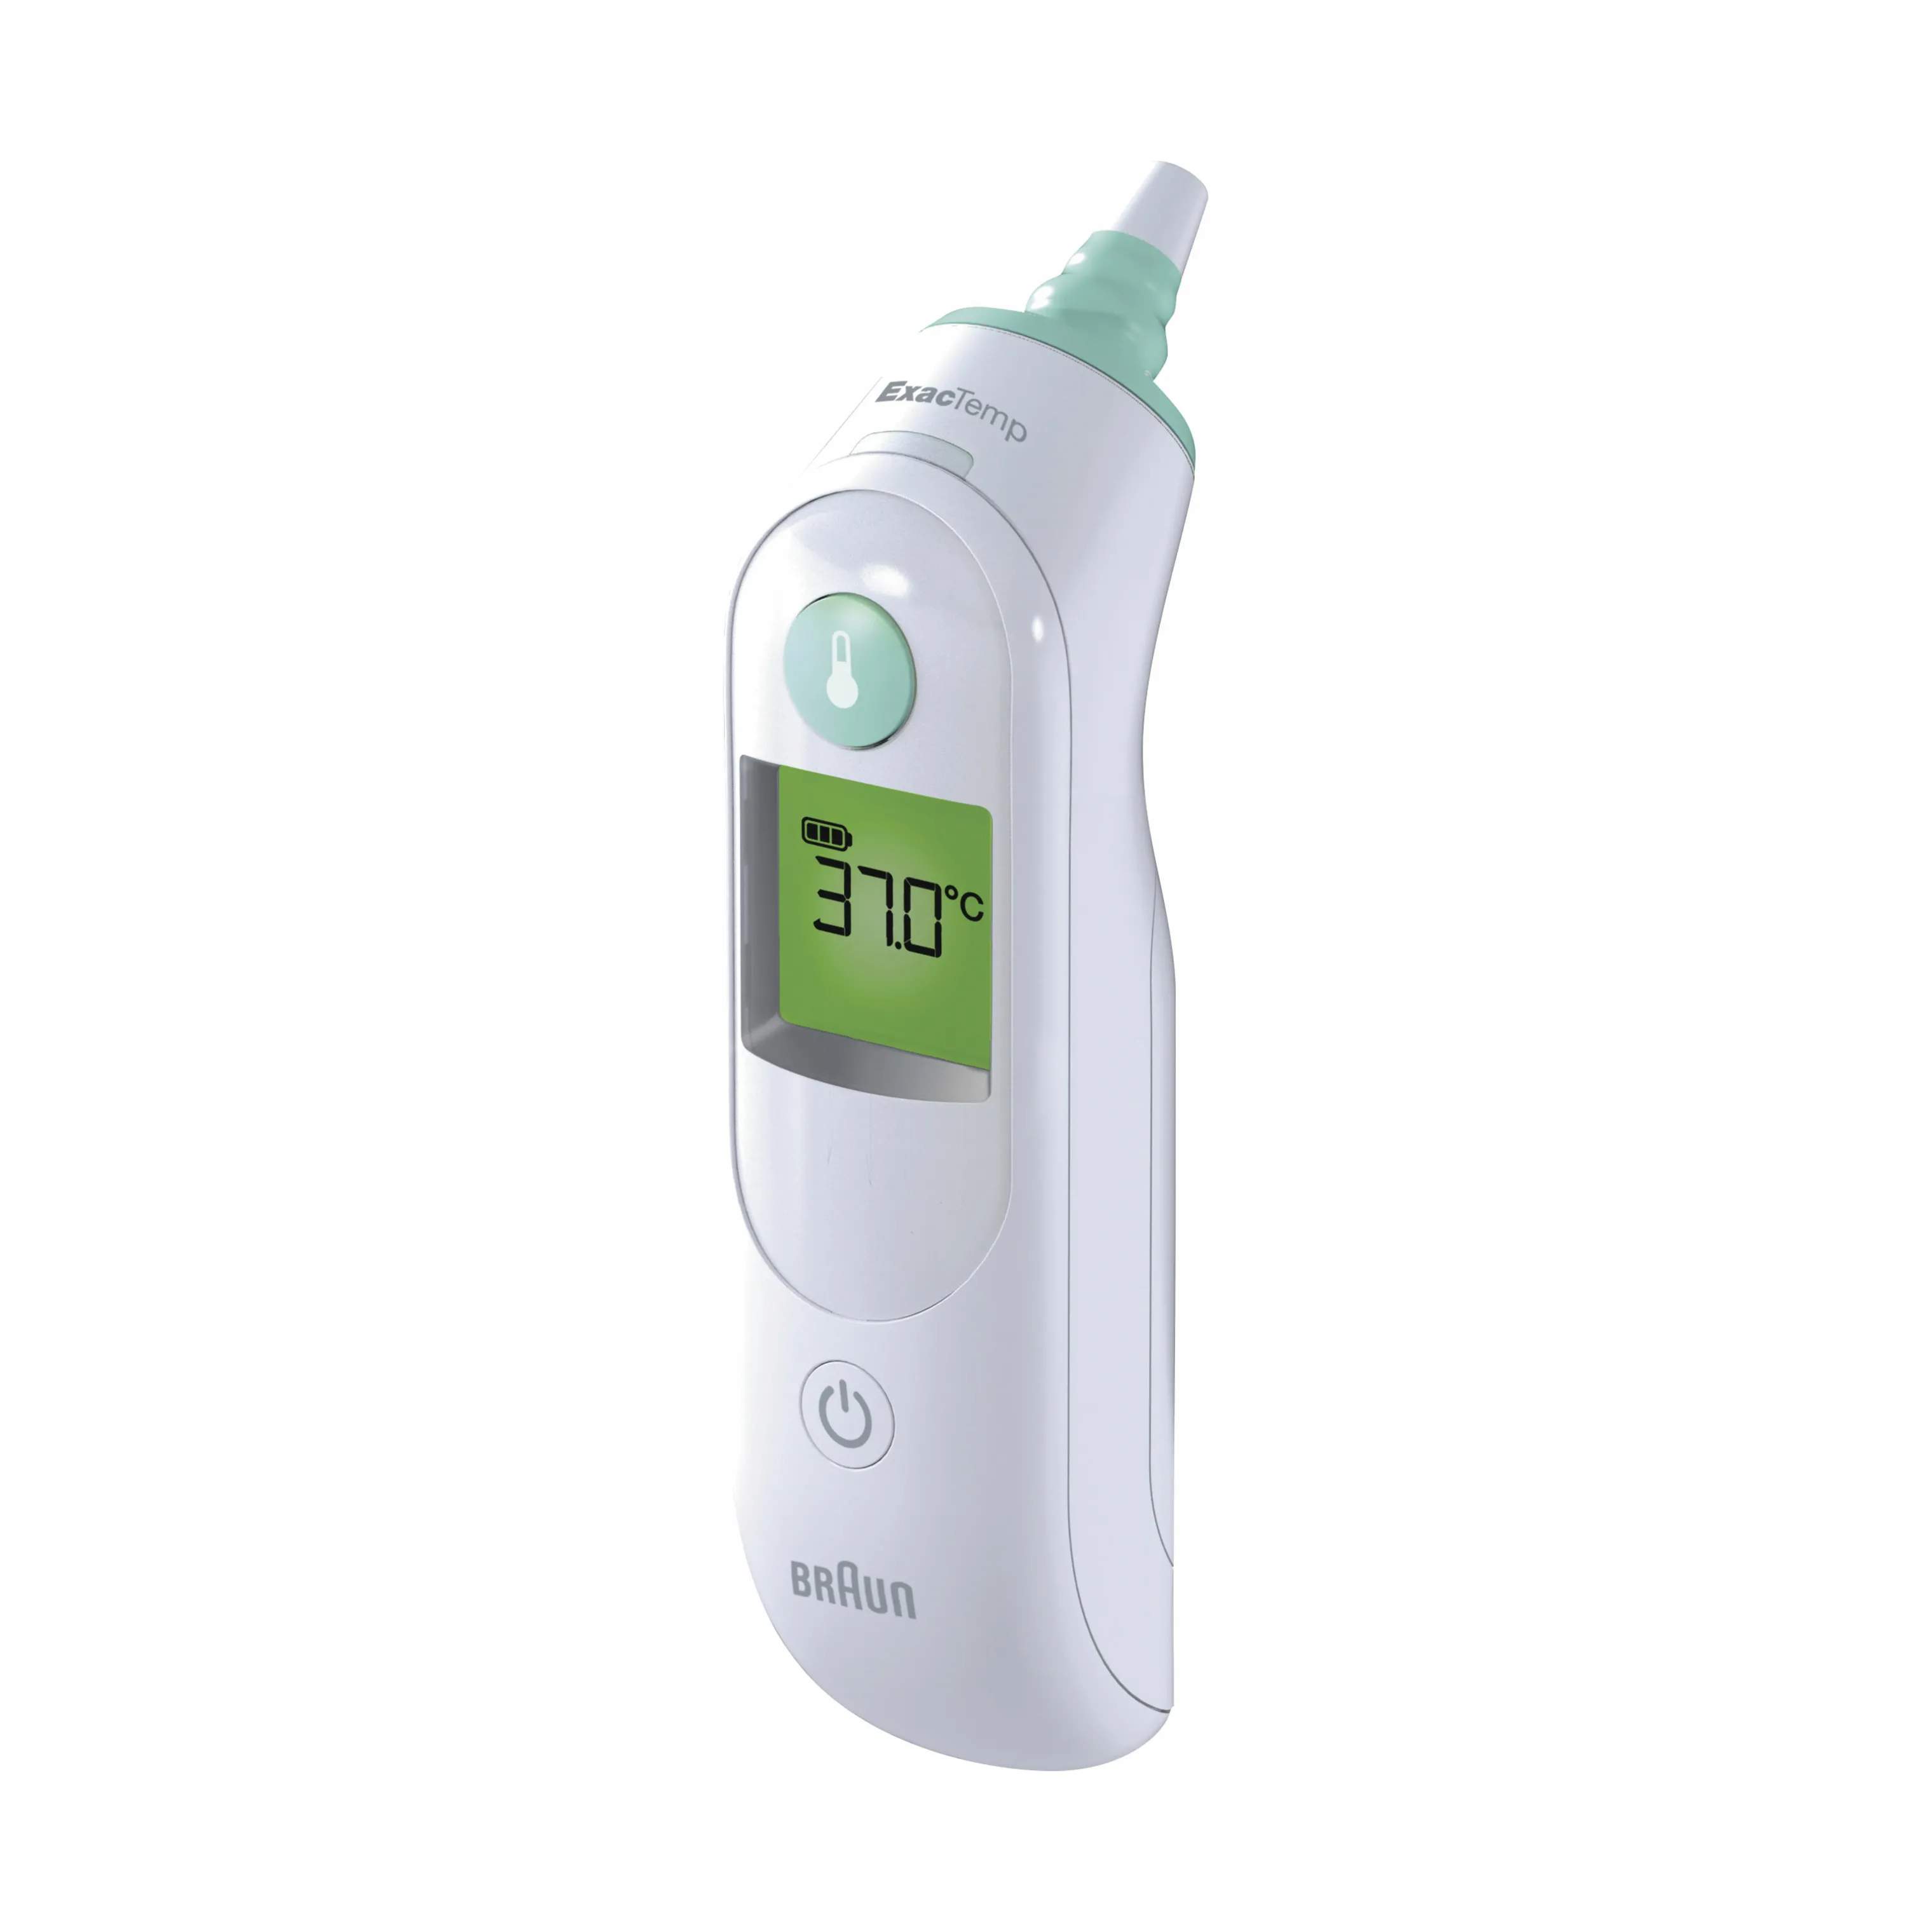 Thermoscan 6 Termometer termometre